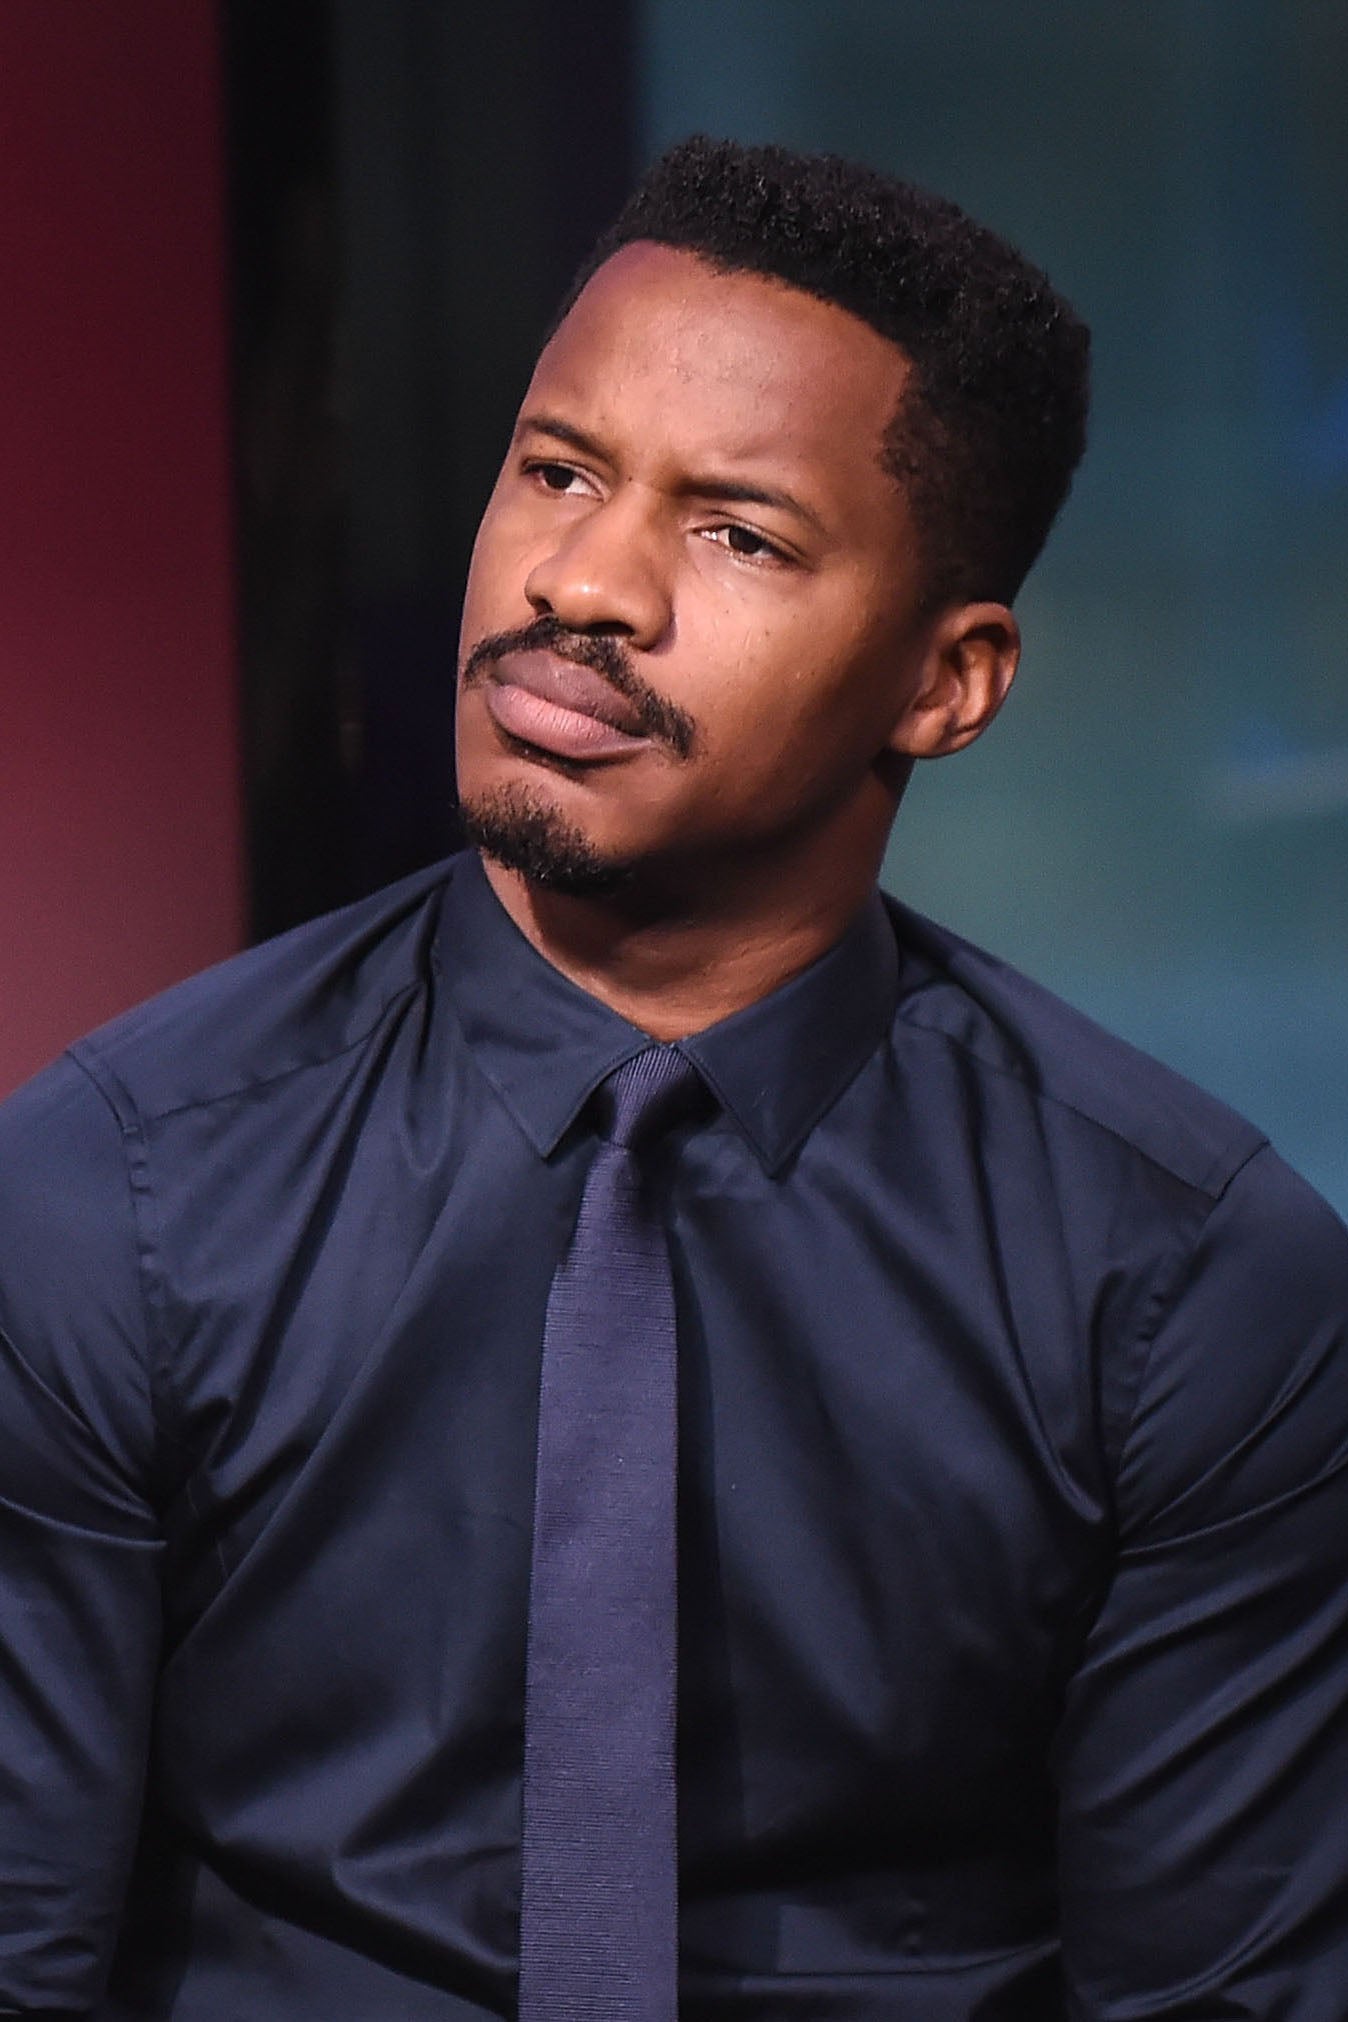 Have Rape Allegations Ruined Nate Parker And Gabrielle Union's Friendship?
